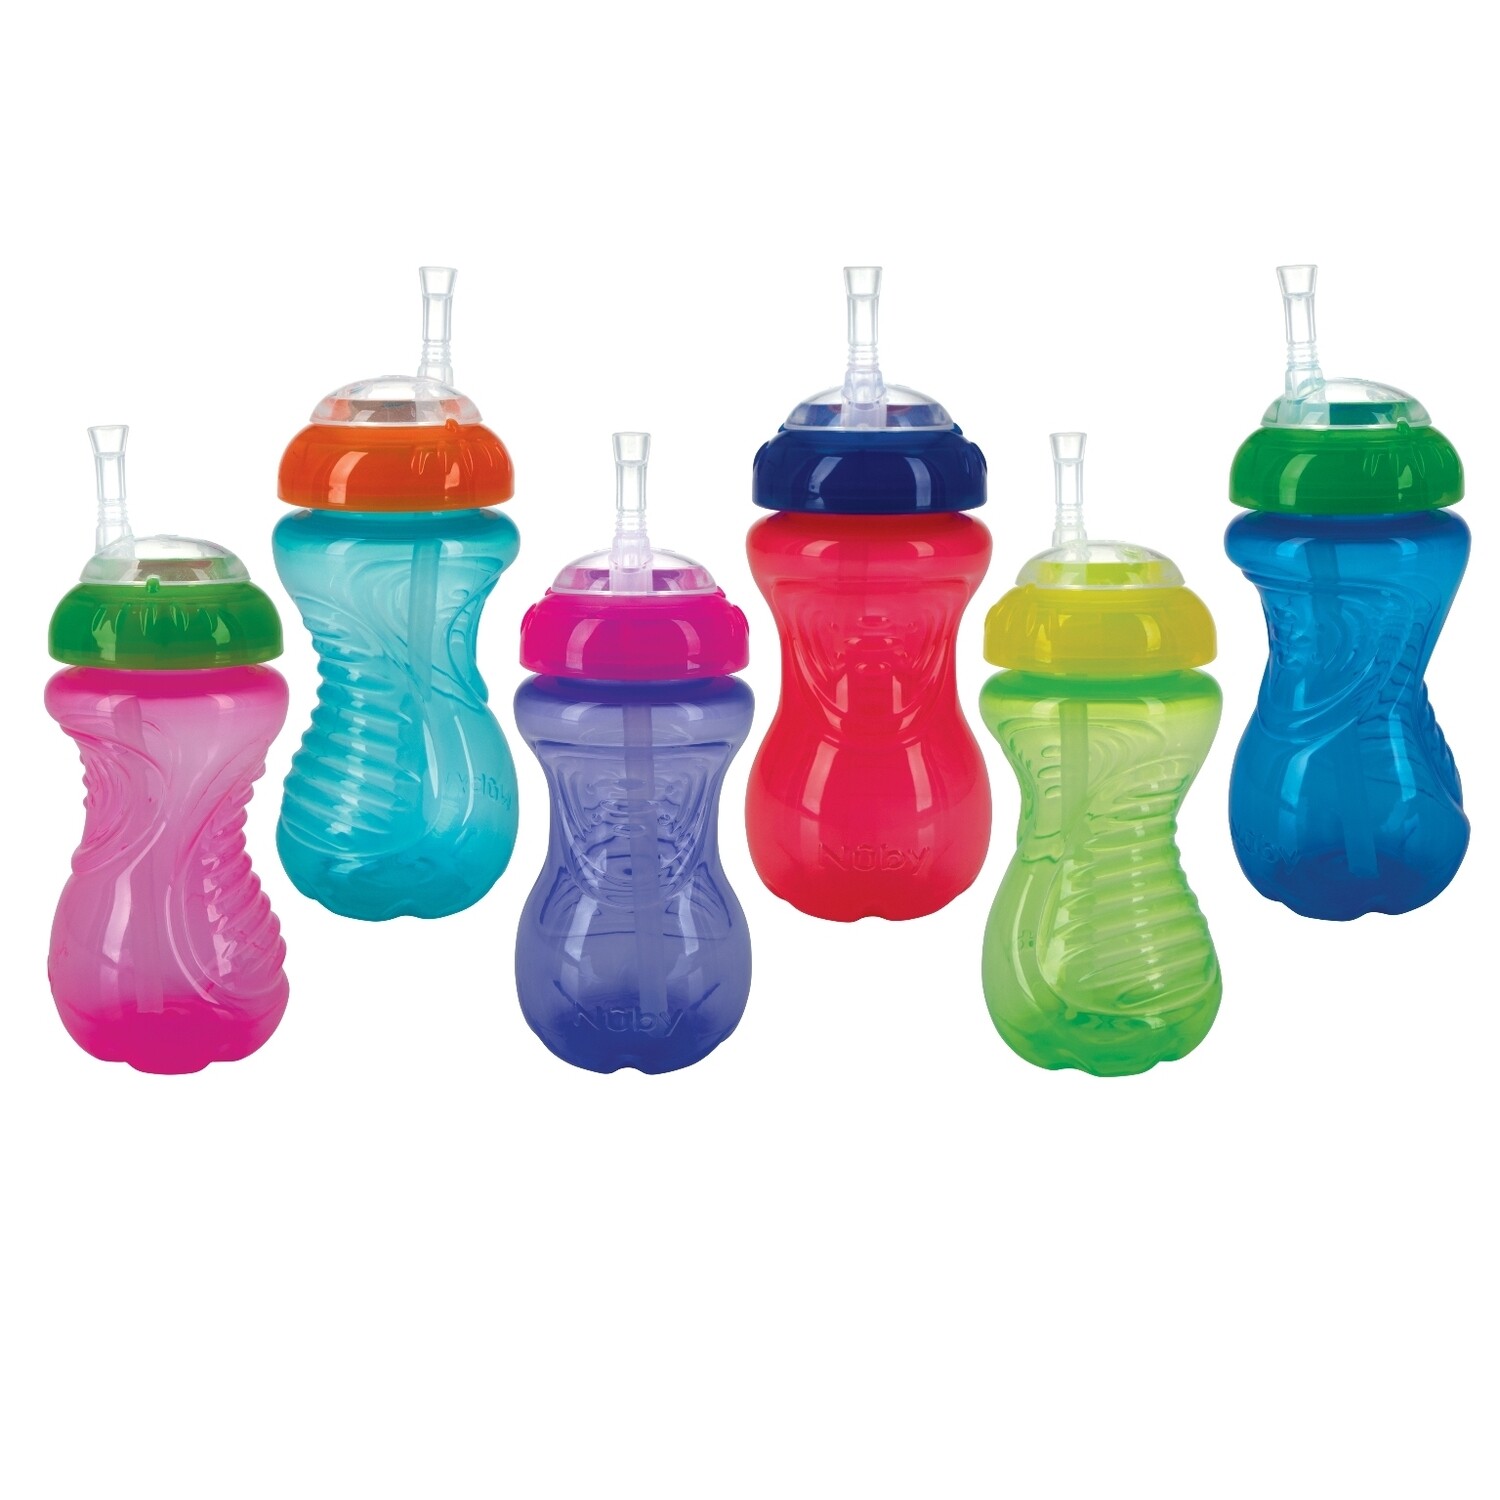 . Case of [24] Nuby No-Spill Cups - Flexi Straw/Colors Vary .